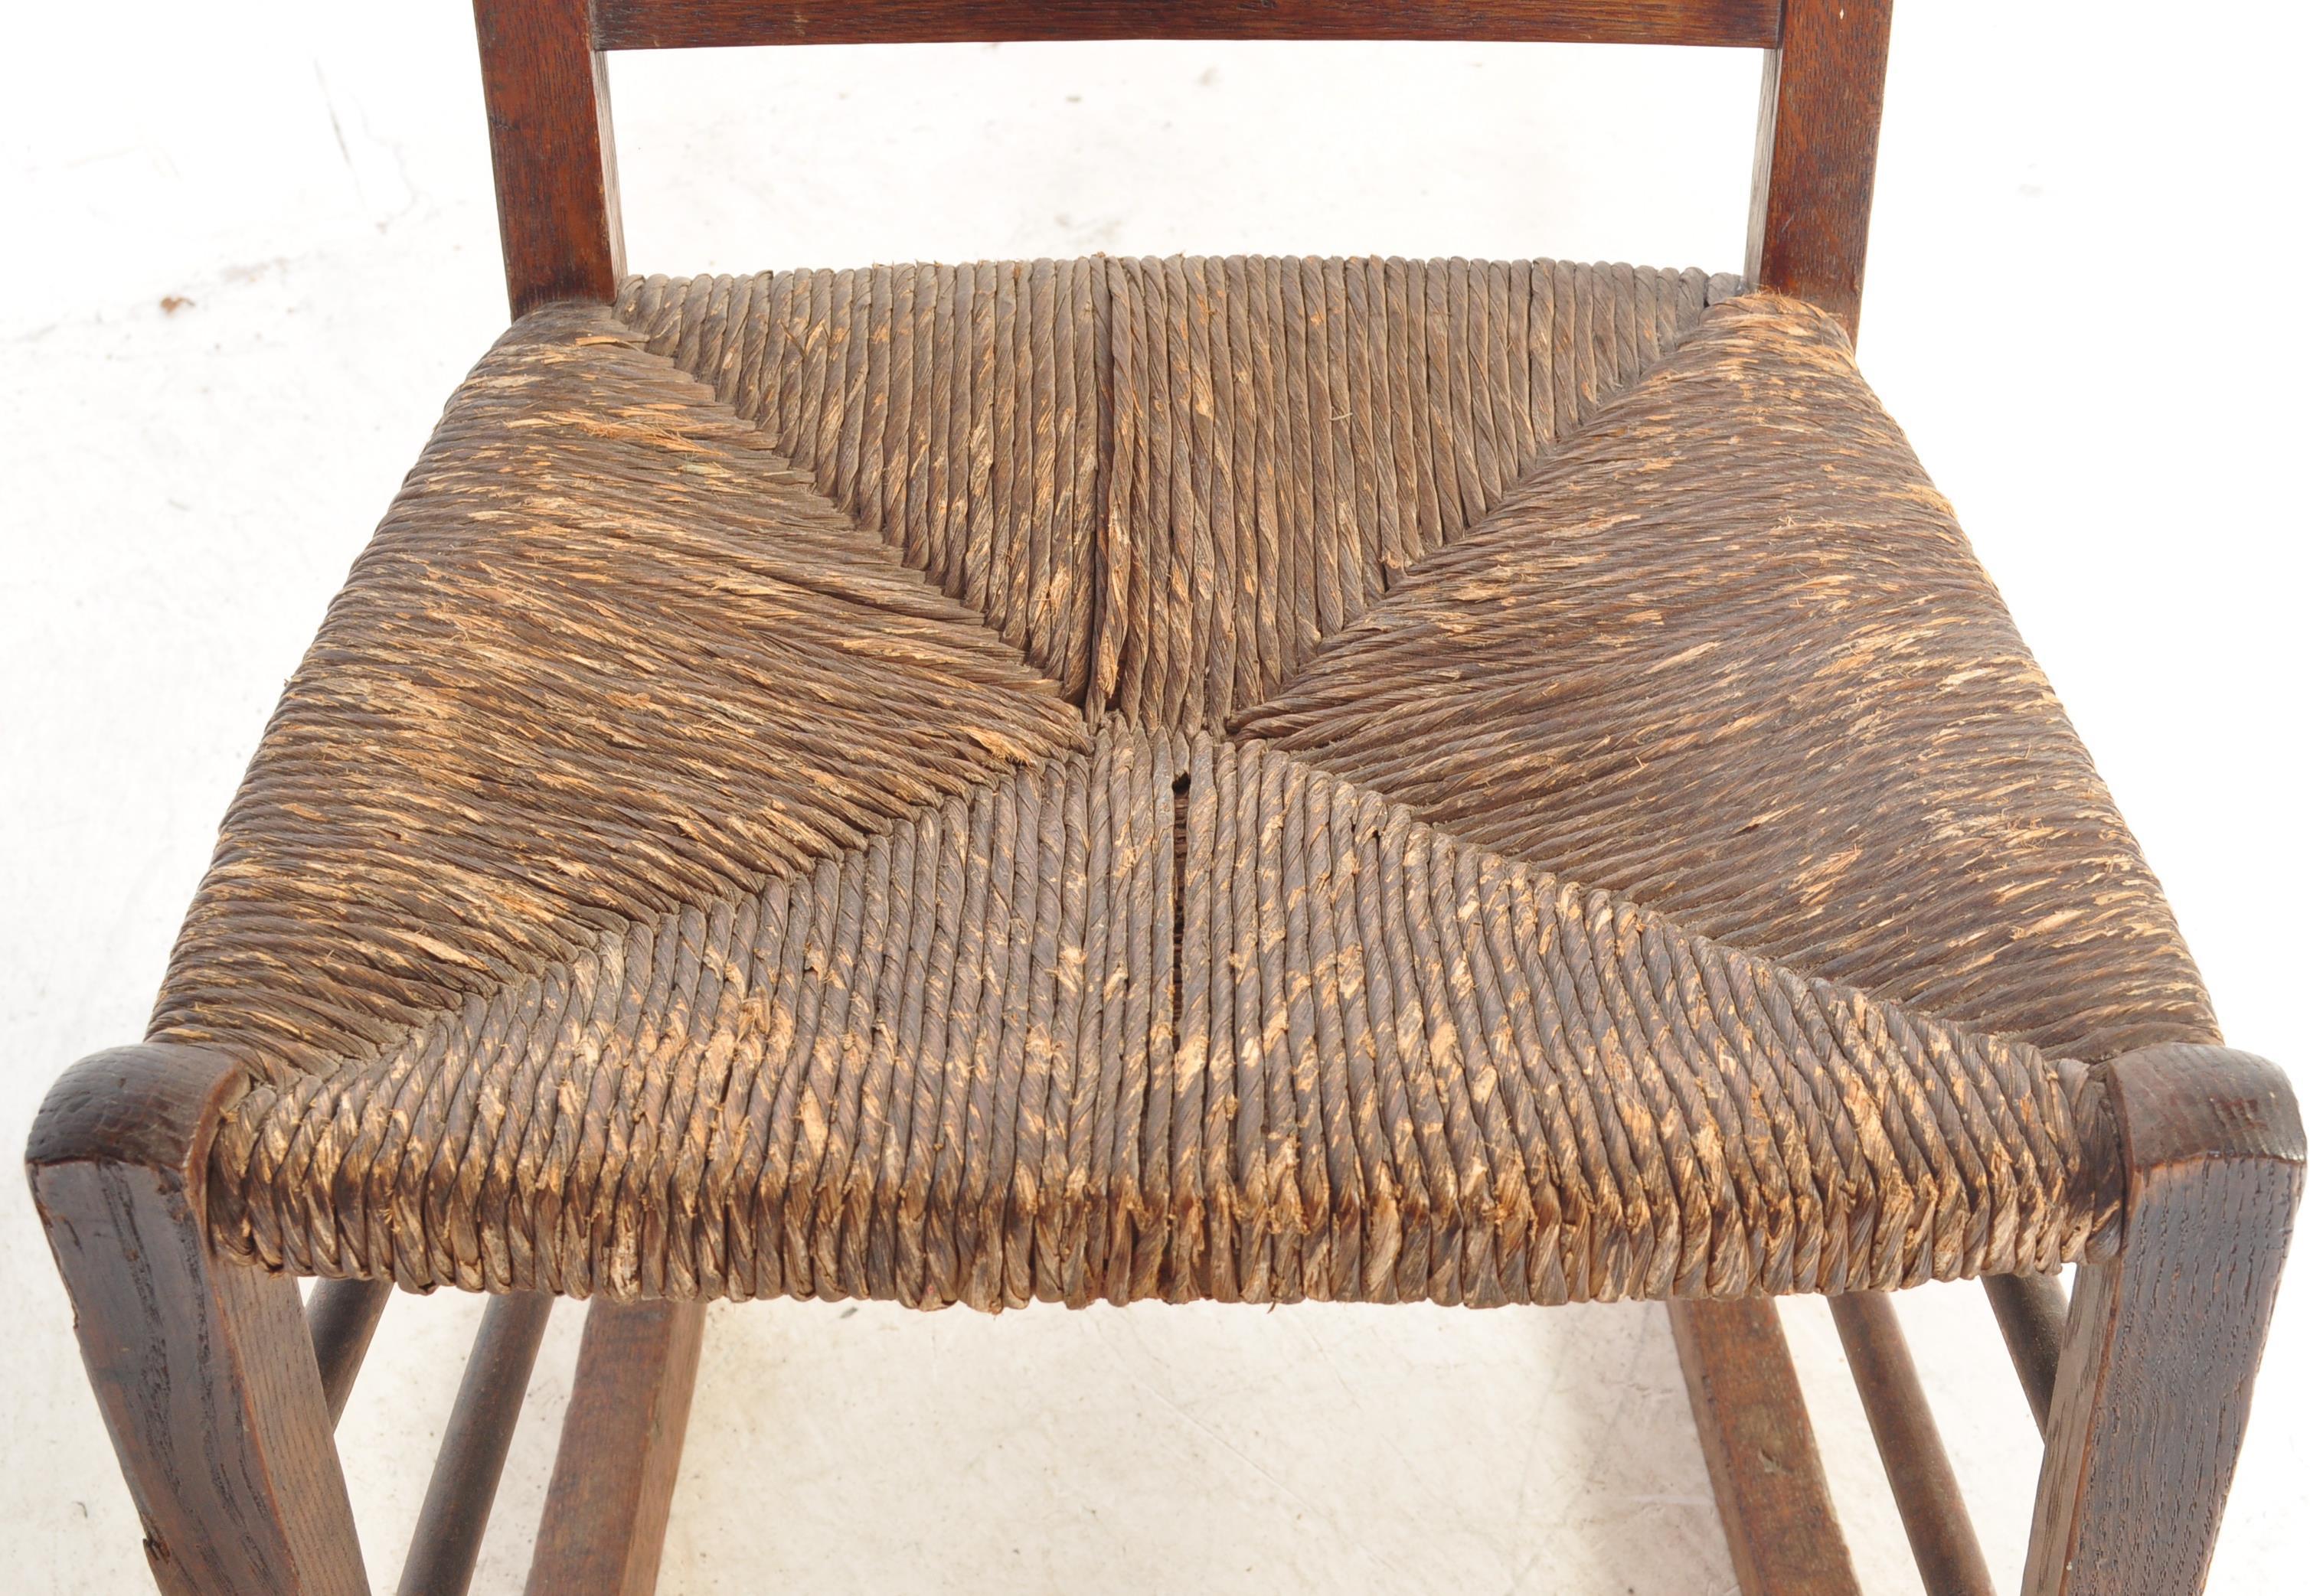 EARLY 20TH CENTURY ARTS & CRAFTS MINATURE ROCKING CHAIR - Image 3 of 6